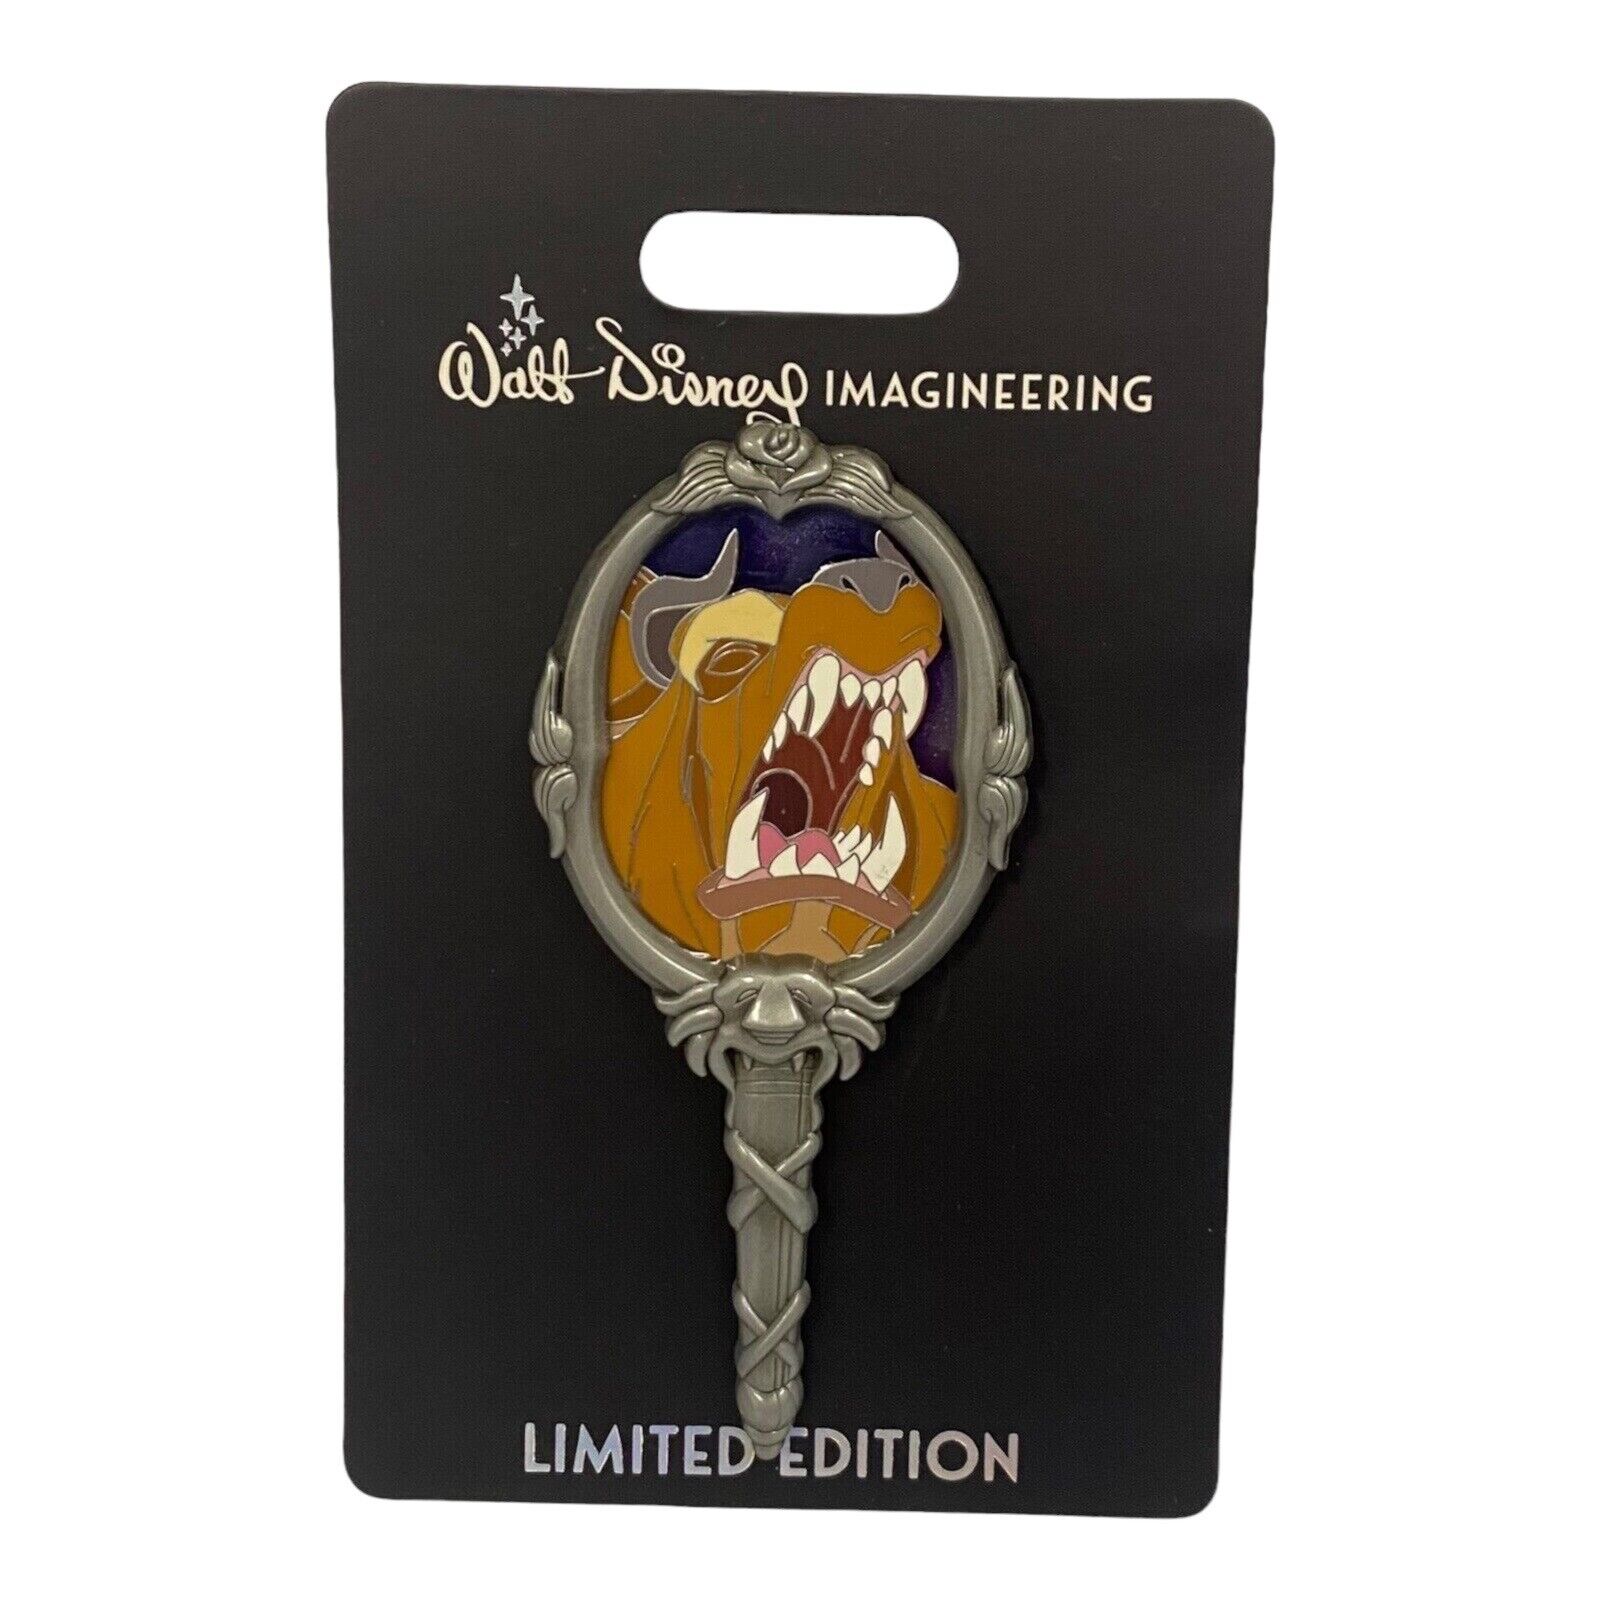 2021 Destination D23 Expo WDI Beauty & The Beast Angry Beast Mirror Pin LE 250